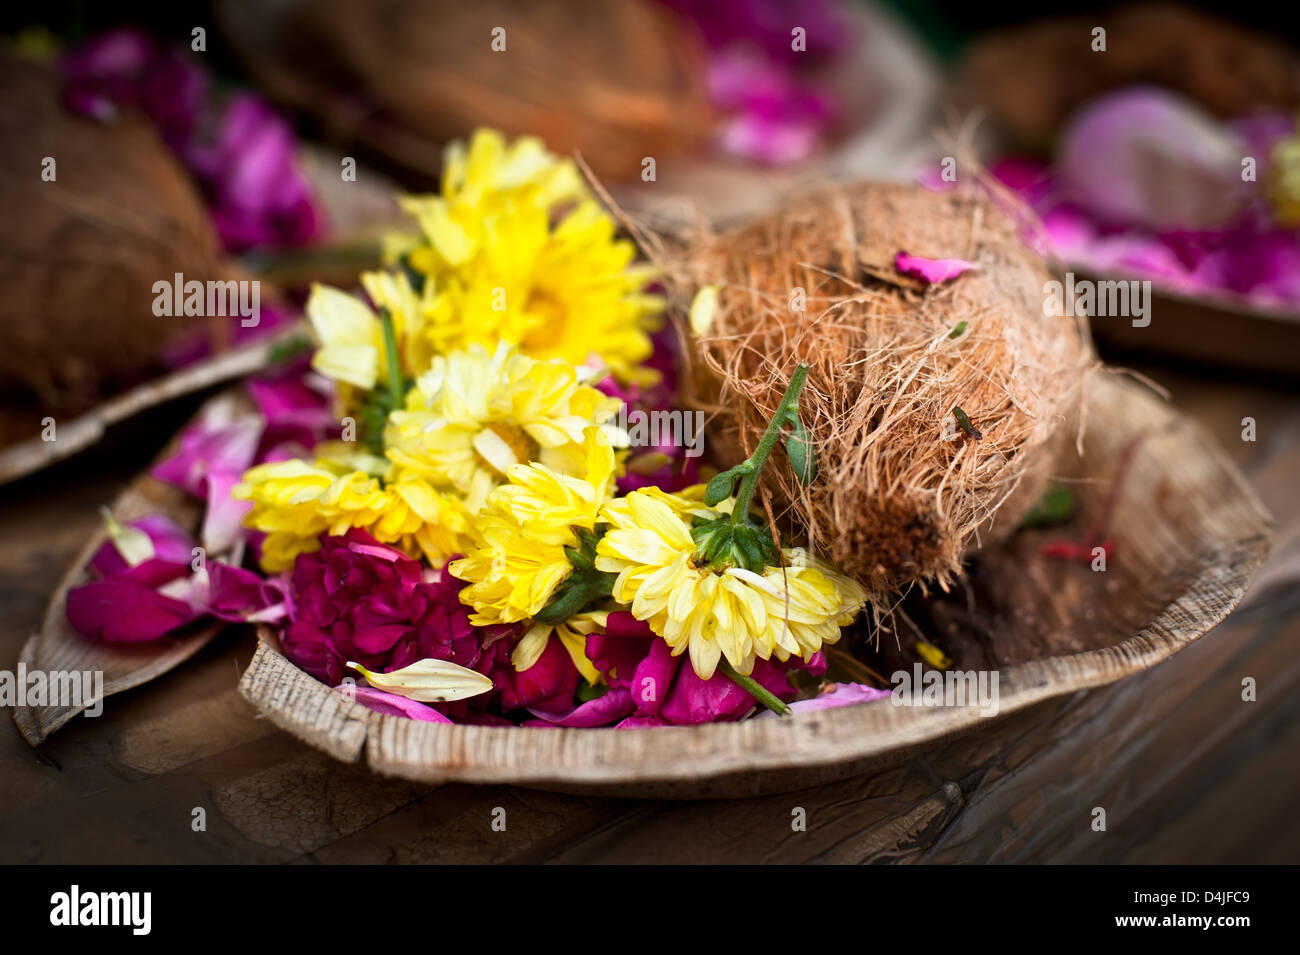 Flower and coconut offerings for Hindu religious ceremony or holy festival Stock Photo